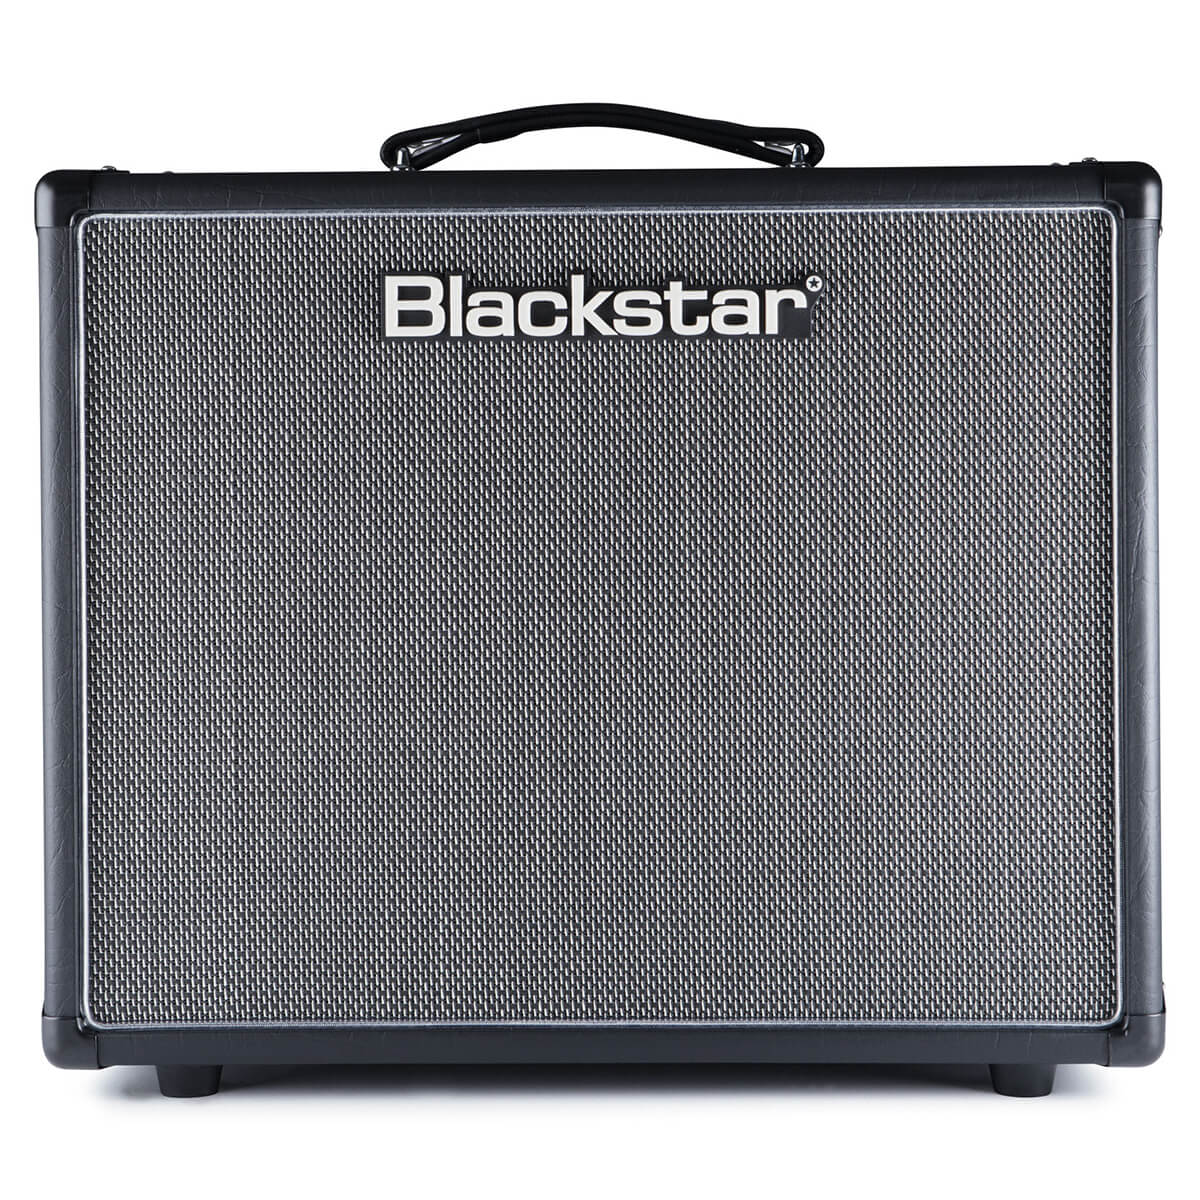 Blackstar HT-20R MKII COMBO 20W 1 x 12" Valve Combo with Reverb